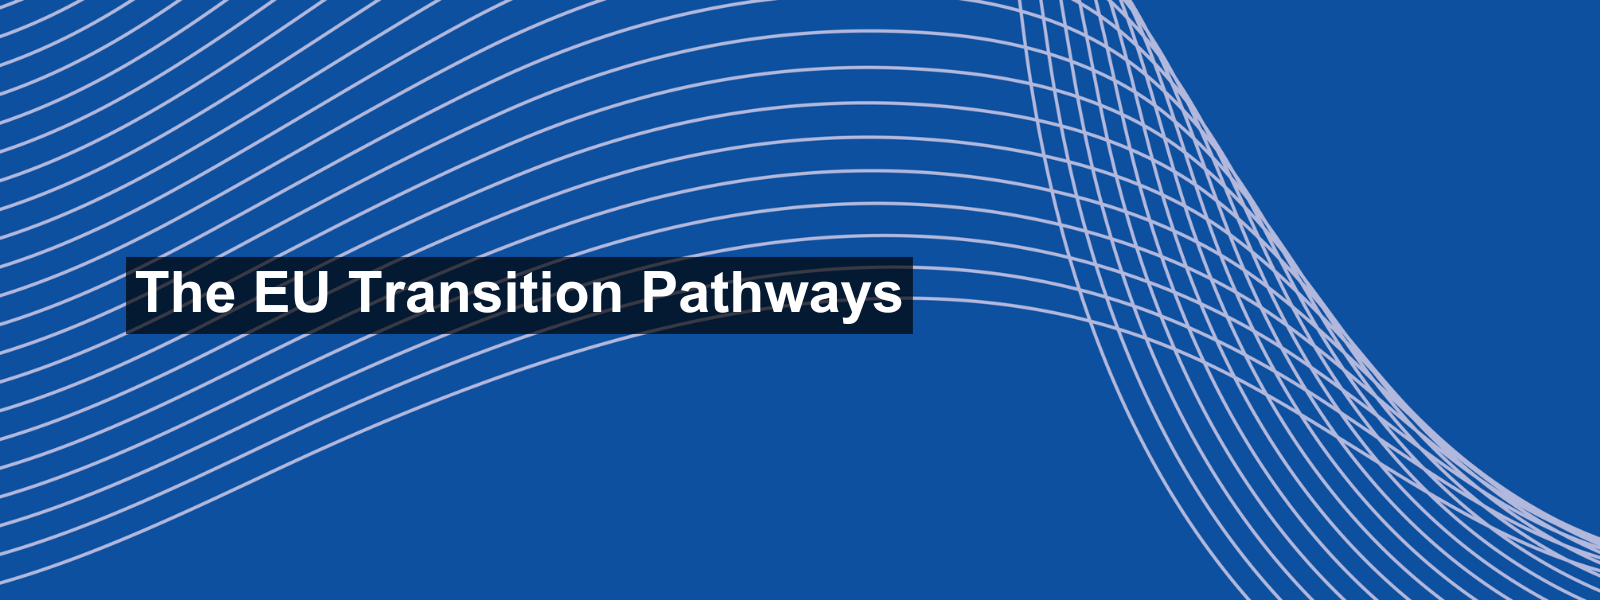 The EU Transition Pathways for